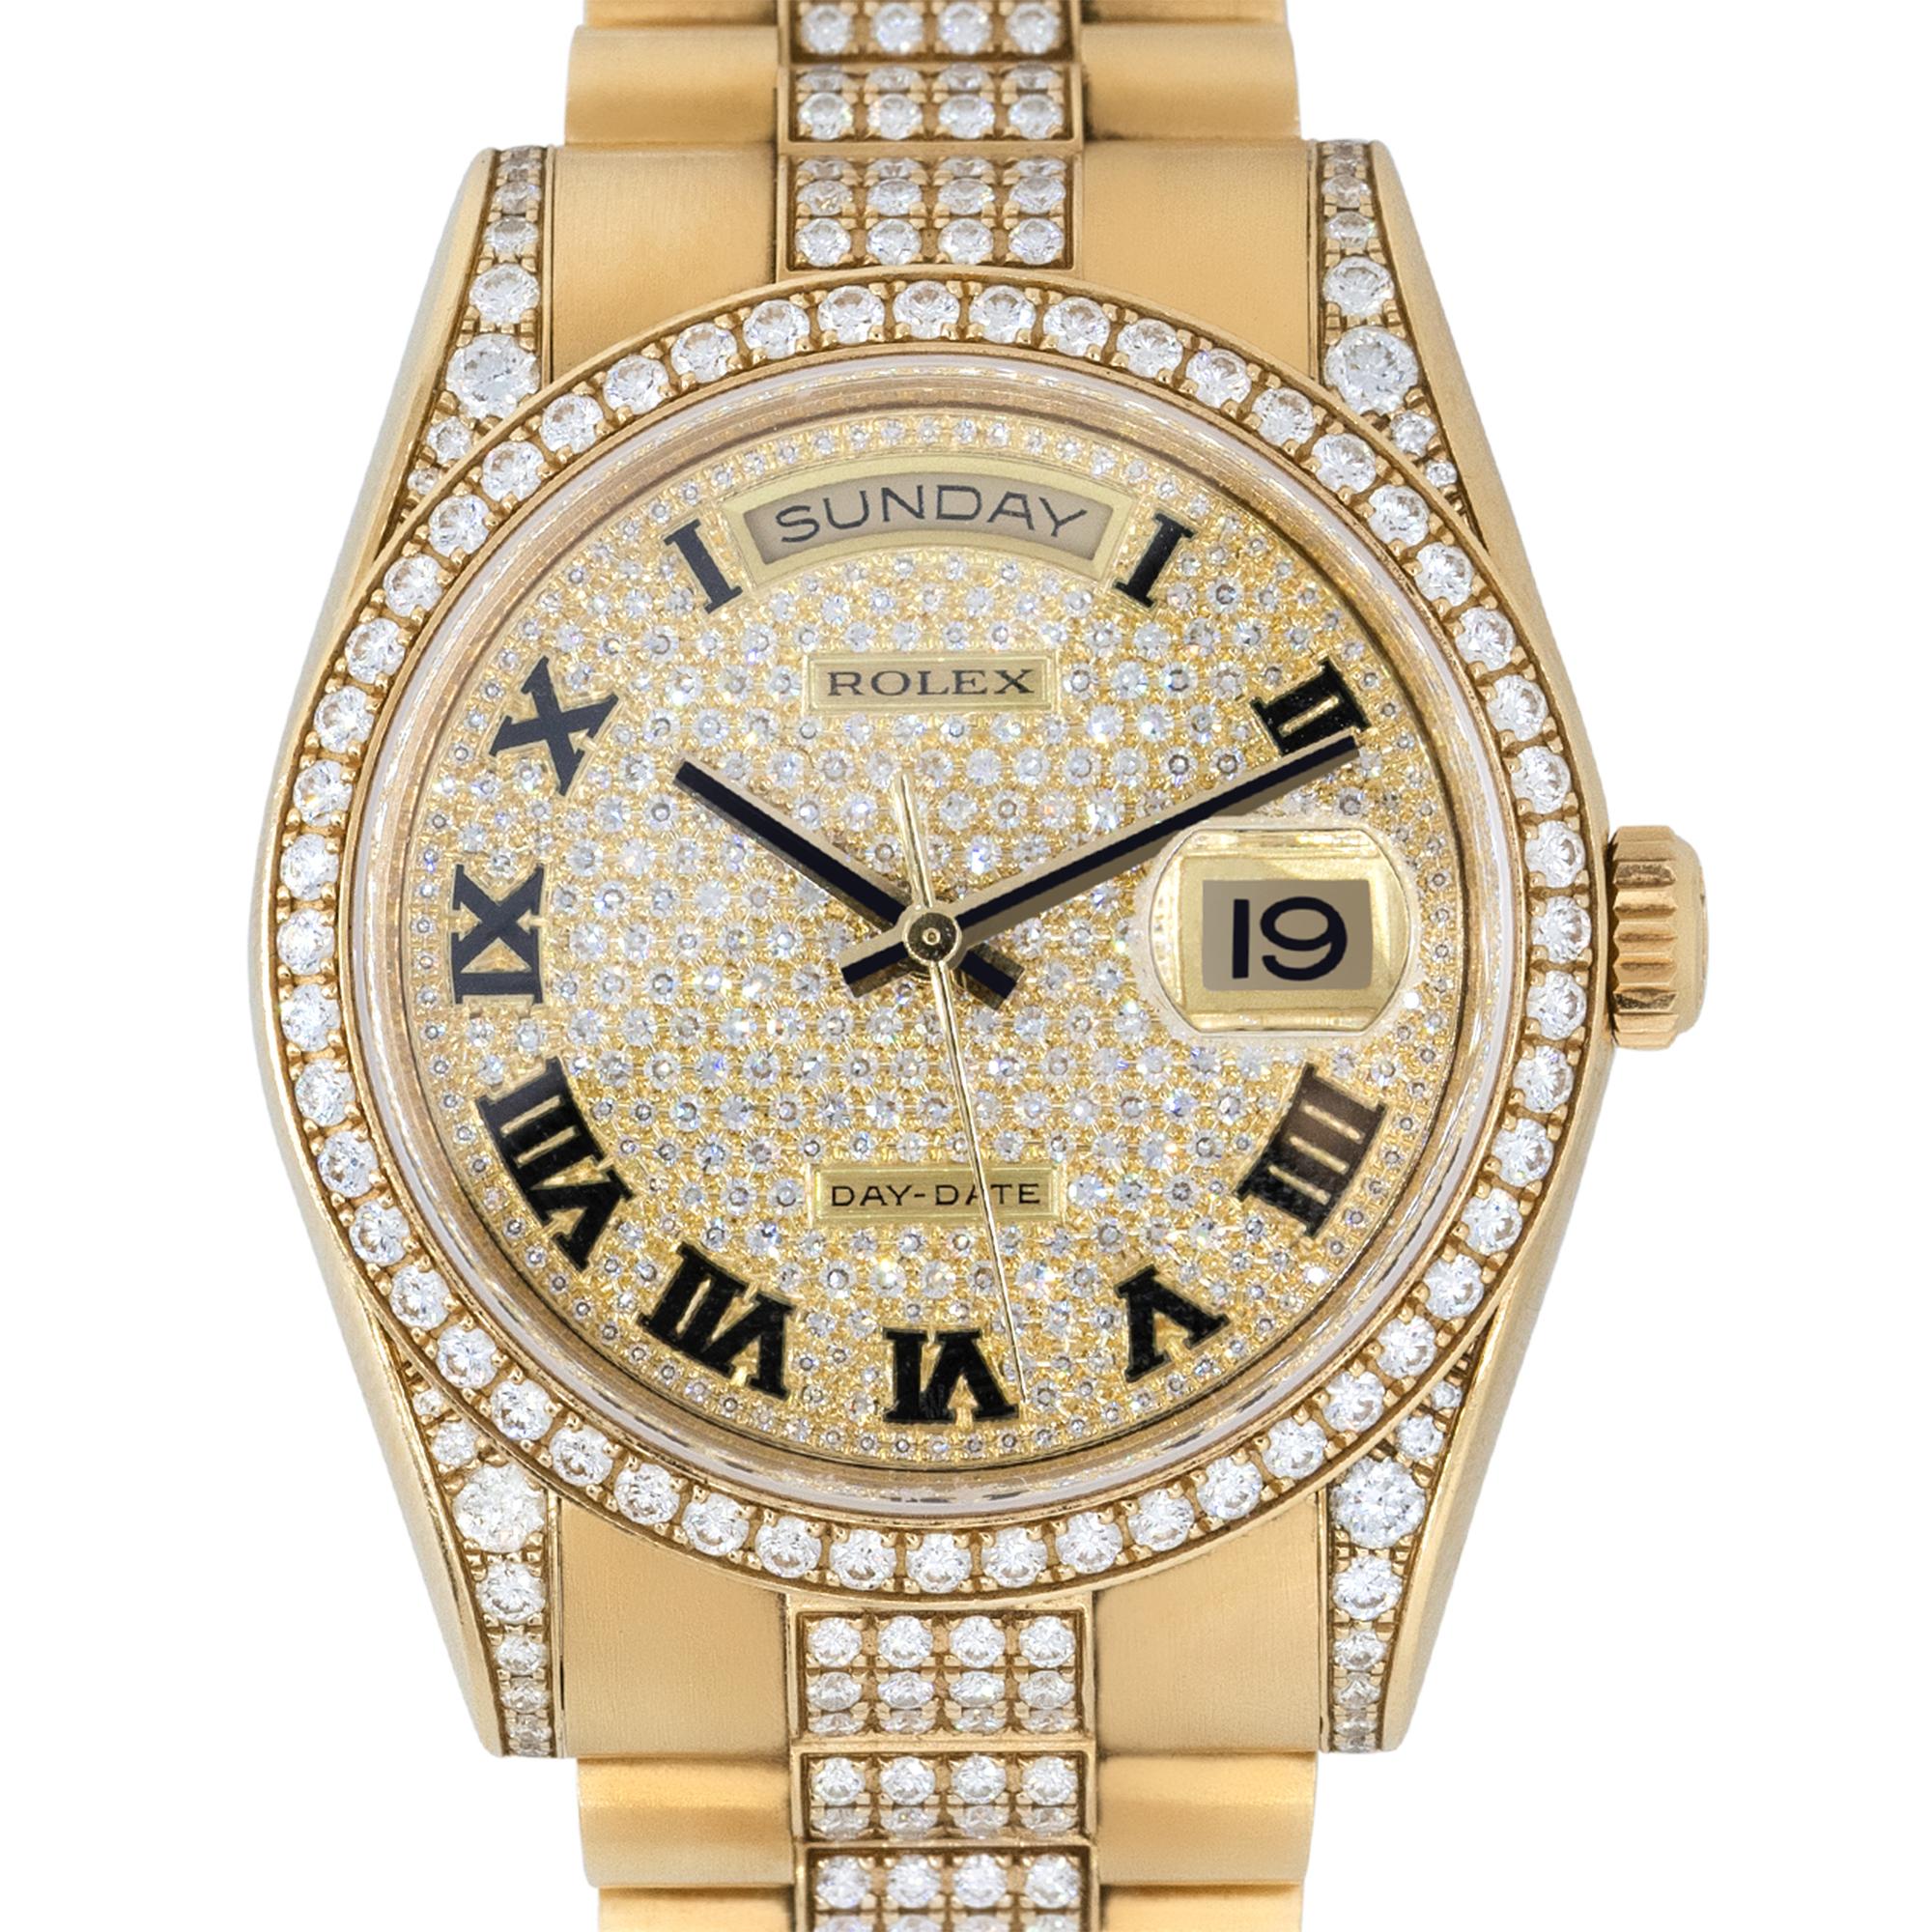 Brand: Rolex
Case Material: 18k Yellow Gold
Case Diameter: 36mm
Crystal: Sapphire Crystal
Bezel: 18k Yellow Gold bezel with Diamonds
Dial: All Diamond dial with black Roman numerals and yellow gold hands. Date can be found at 3 o'clock
Bracelet: 18k